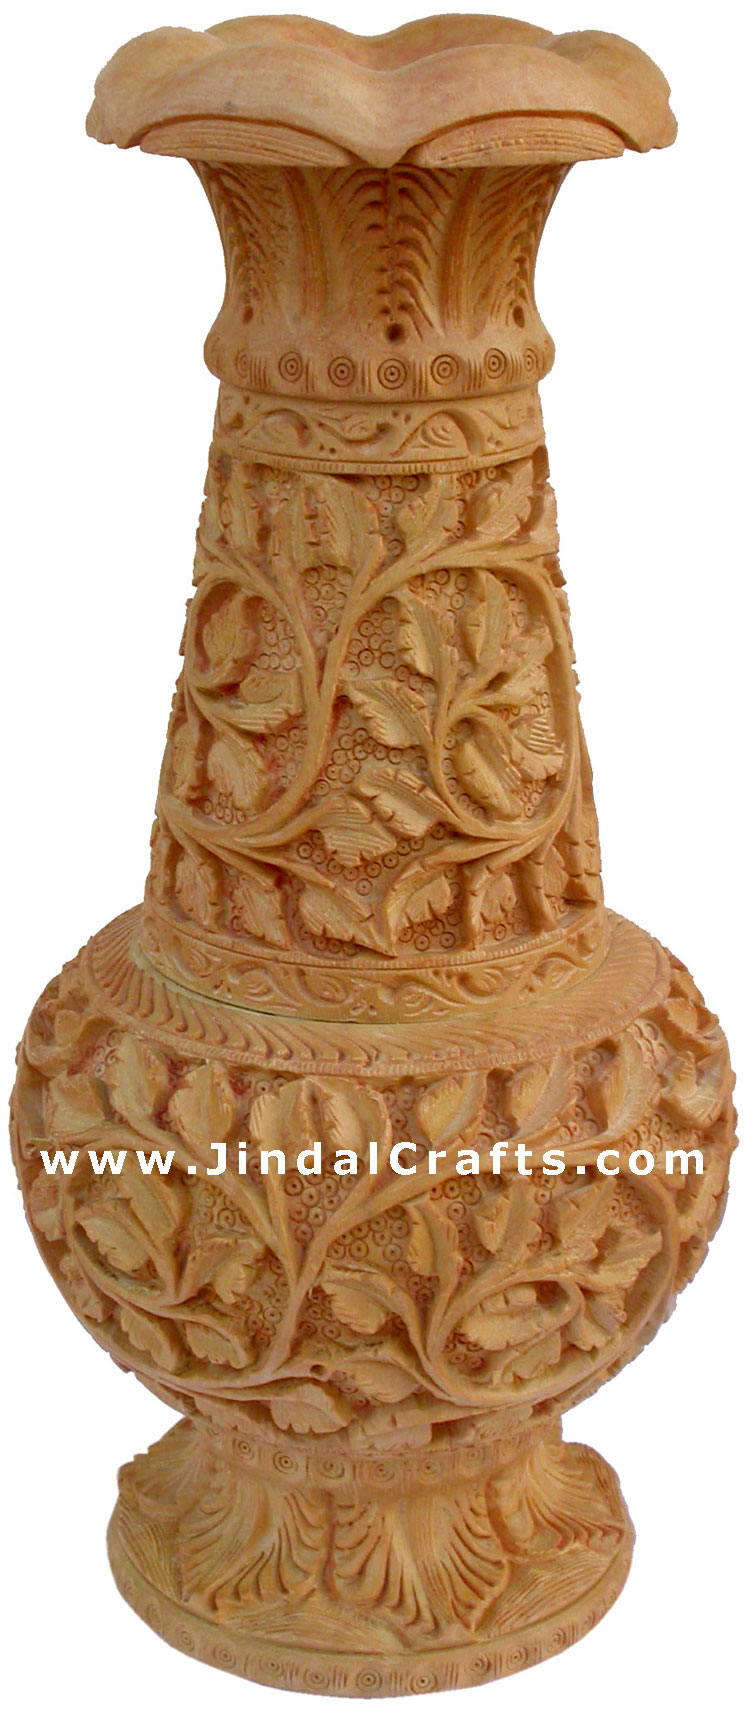 Hand Carved Wooden Decorative Vase India Fair Trade Art